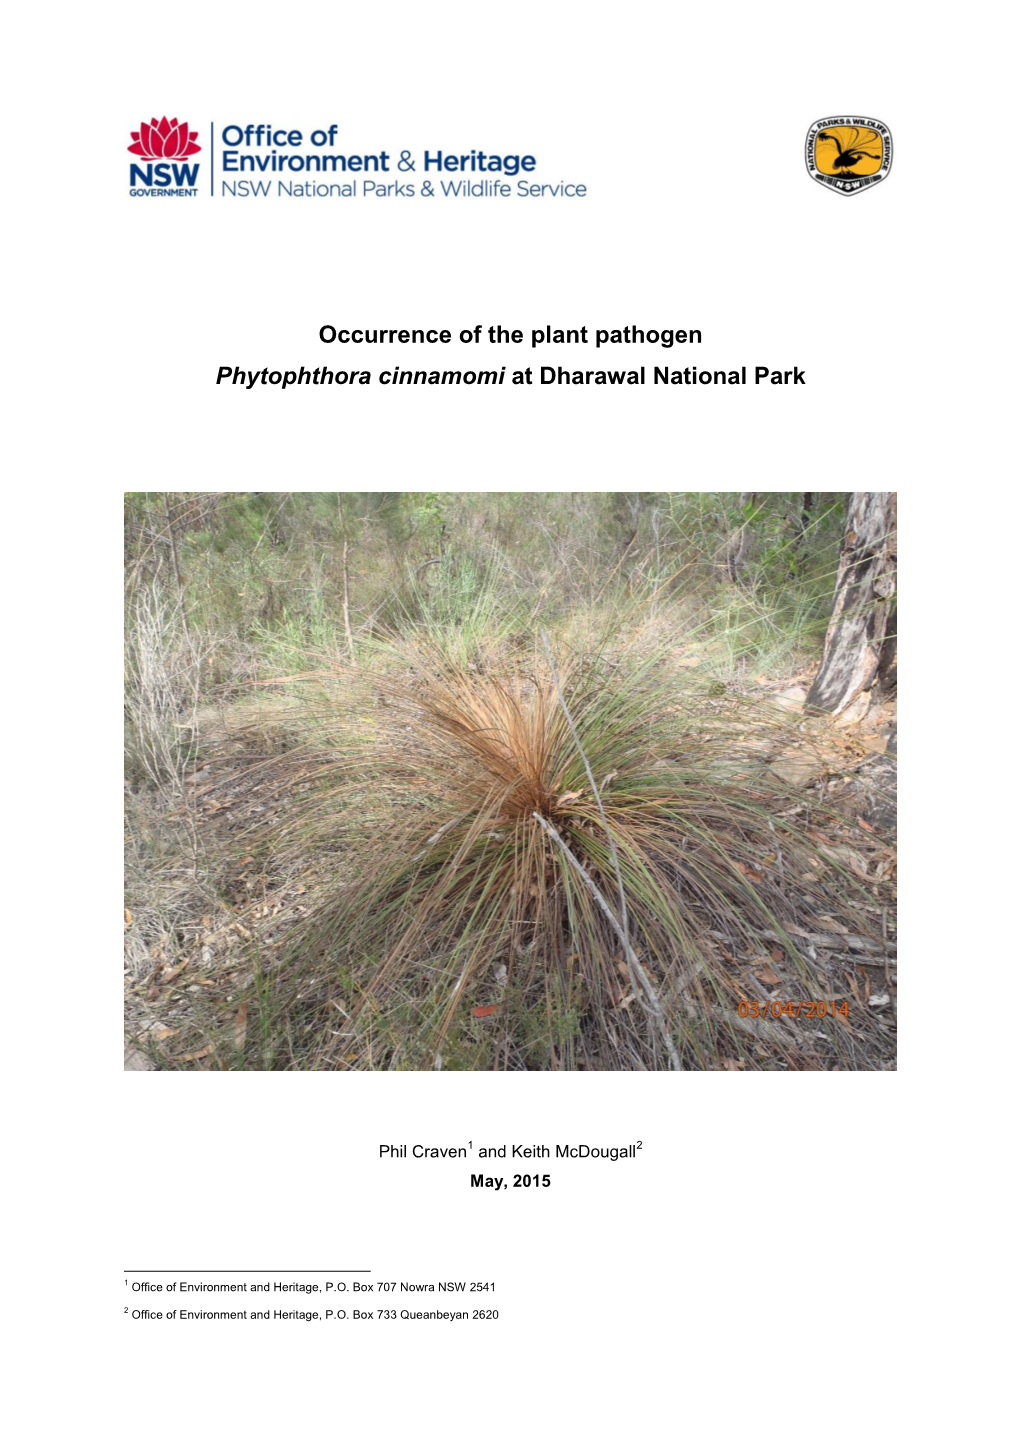 Occurrence of the Plant Pathogen Phytophthora Cinnamomi at Dharawal National Park